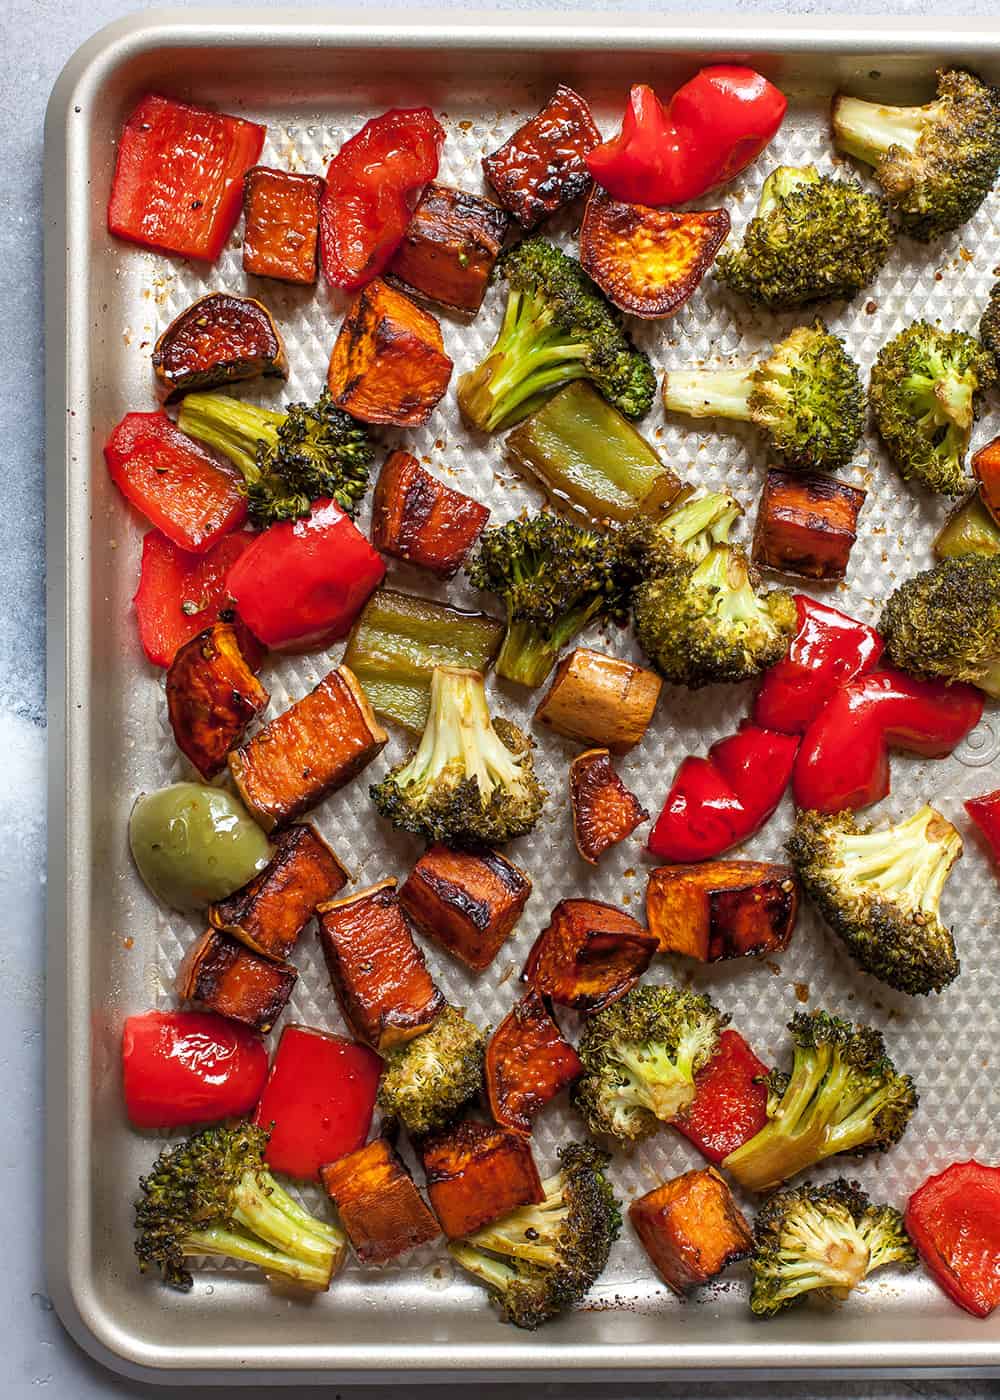 Overhead view of veggies on a baking sheet.